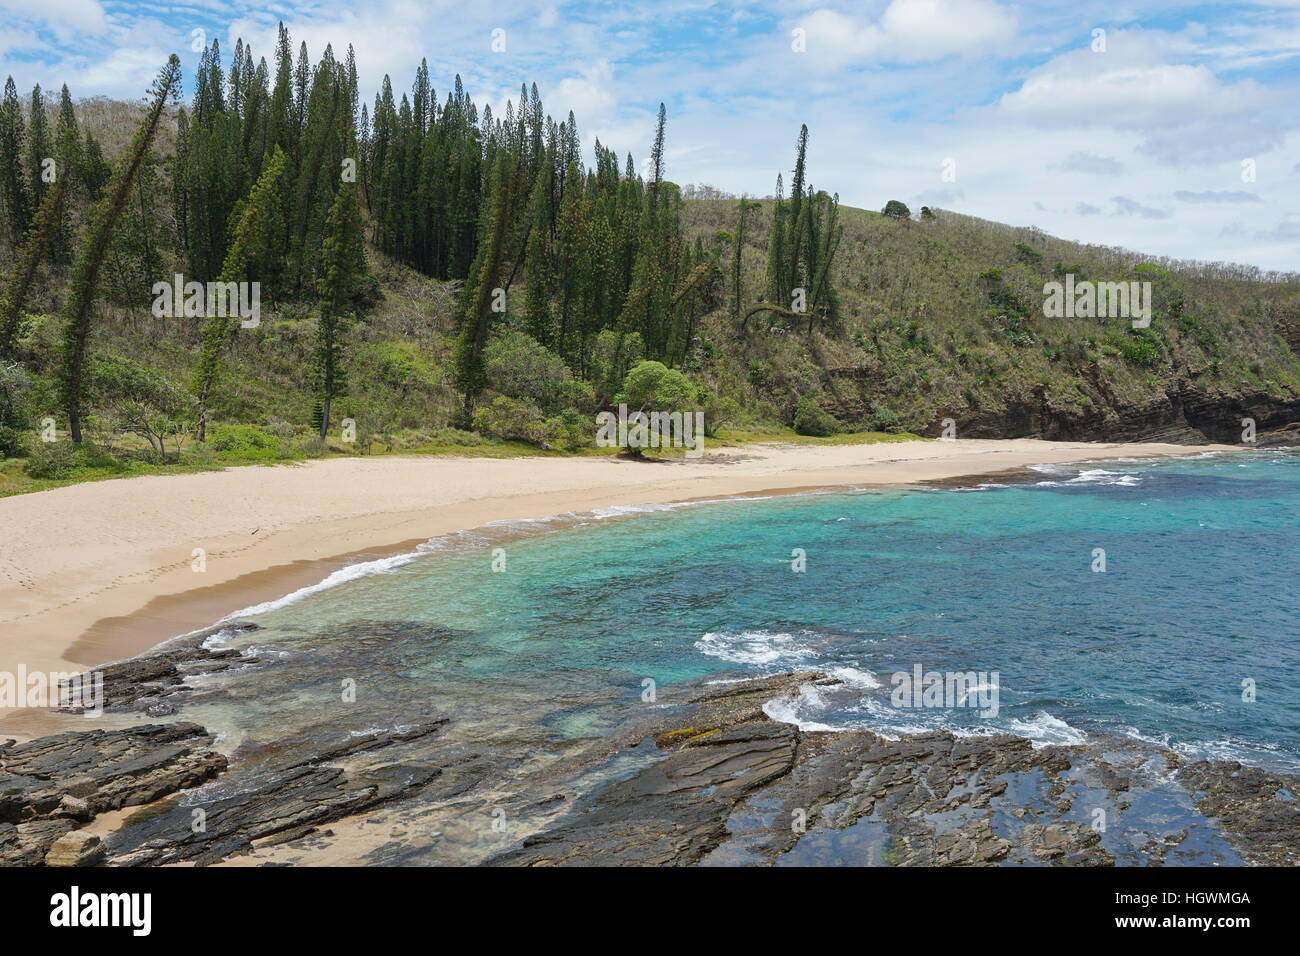 New Caledonia coastal landscape, beach with endemic pines, Turtle bay, Bourail, Grande Terre, south Pacific Stock Photo